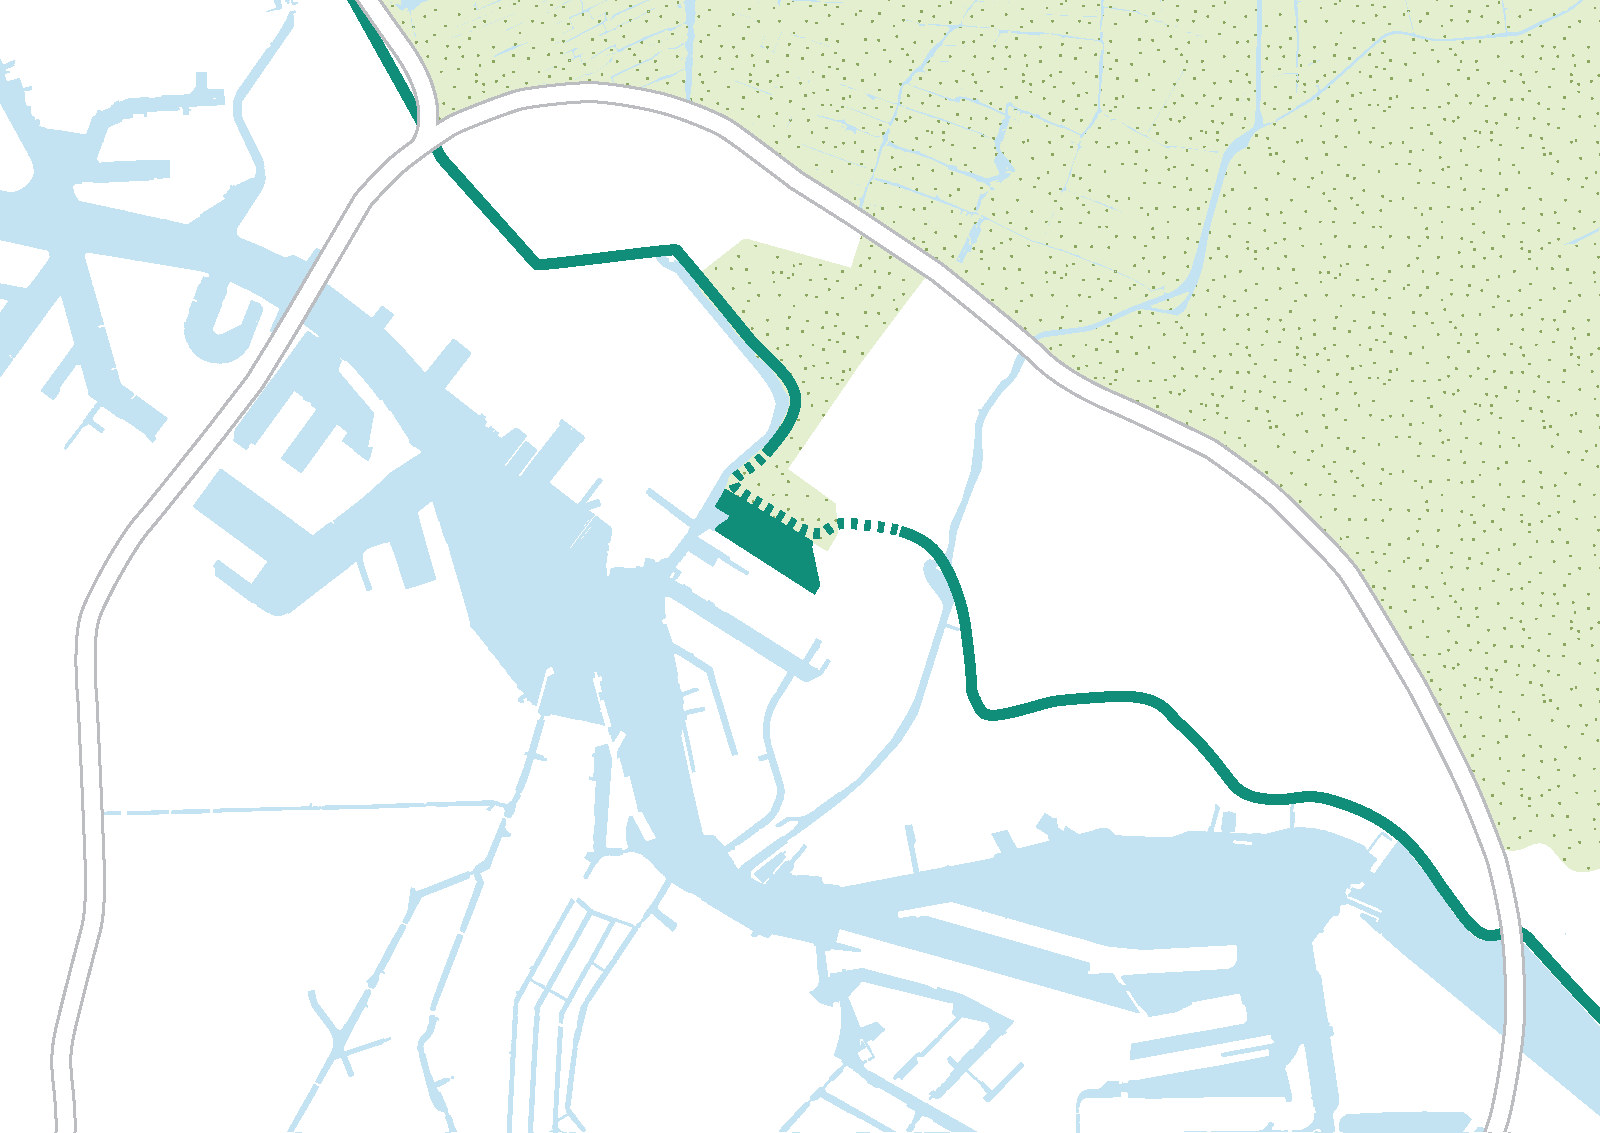 2d map at Amsterdam scale showing position of the Klaprozenbuurt and the historic dike by BETA architect Amsterdam Evert Klinkenberg Auguste Gus van Oppen